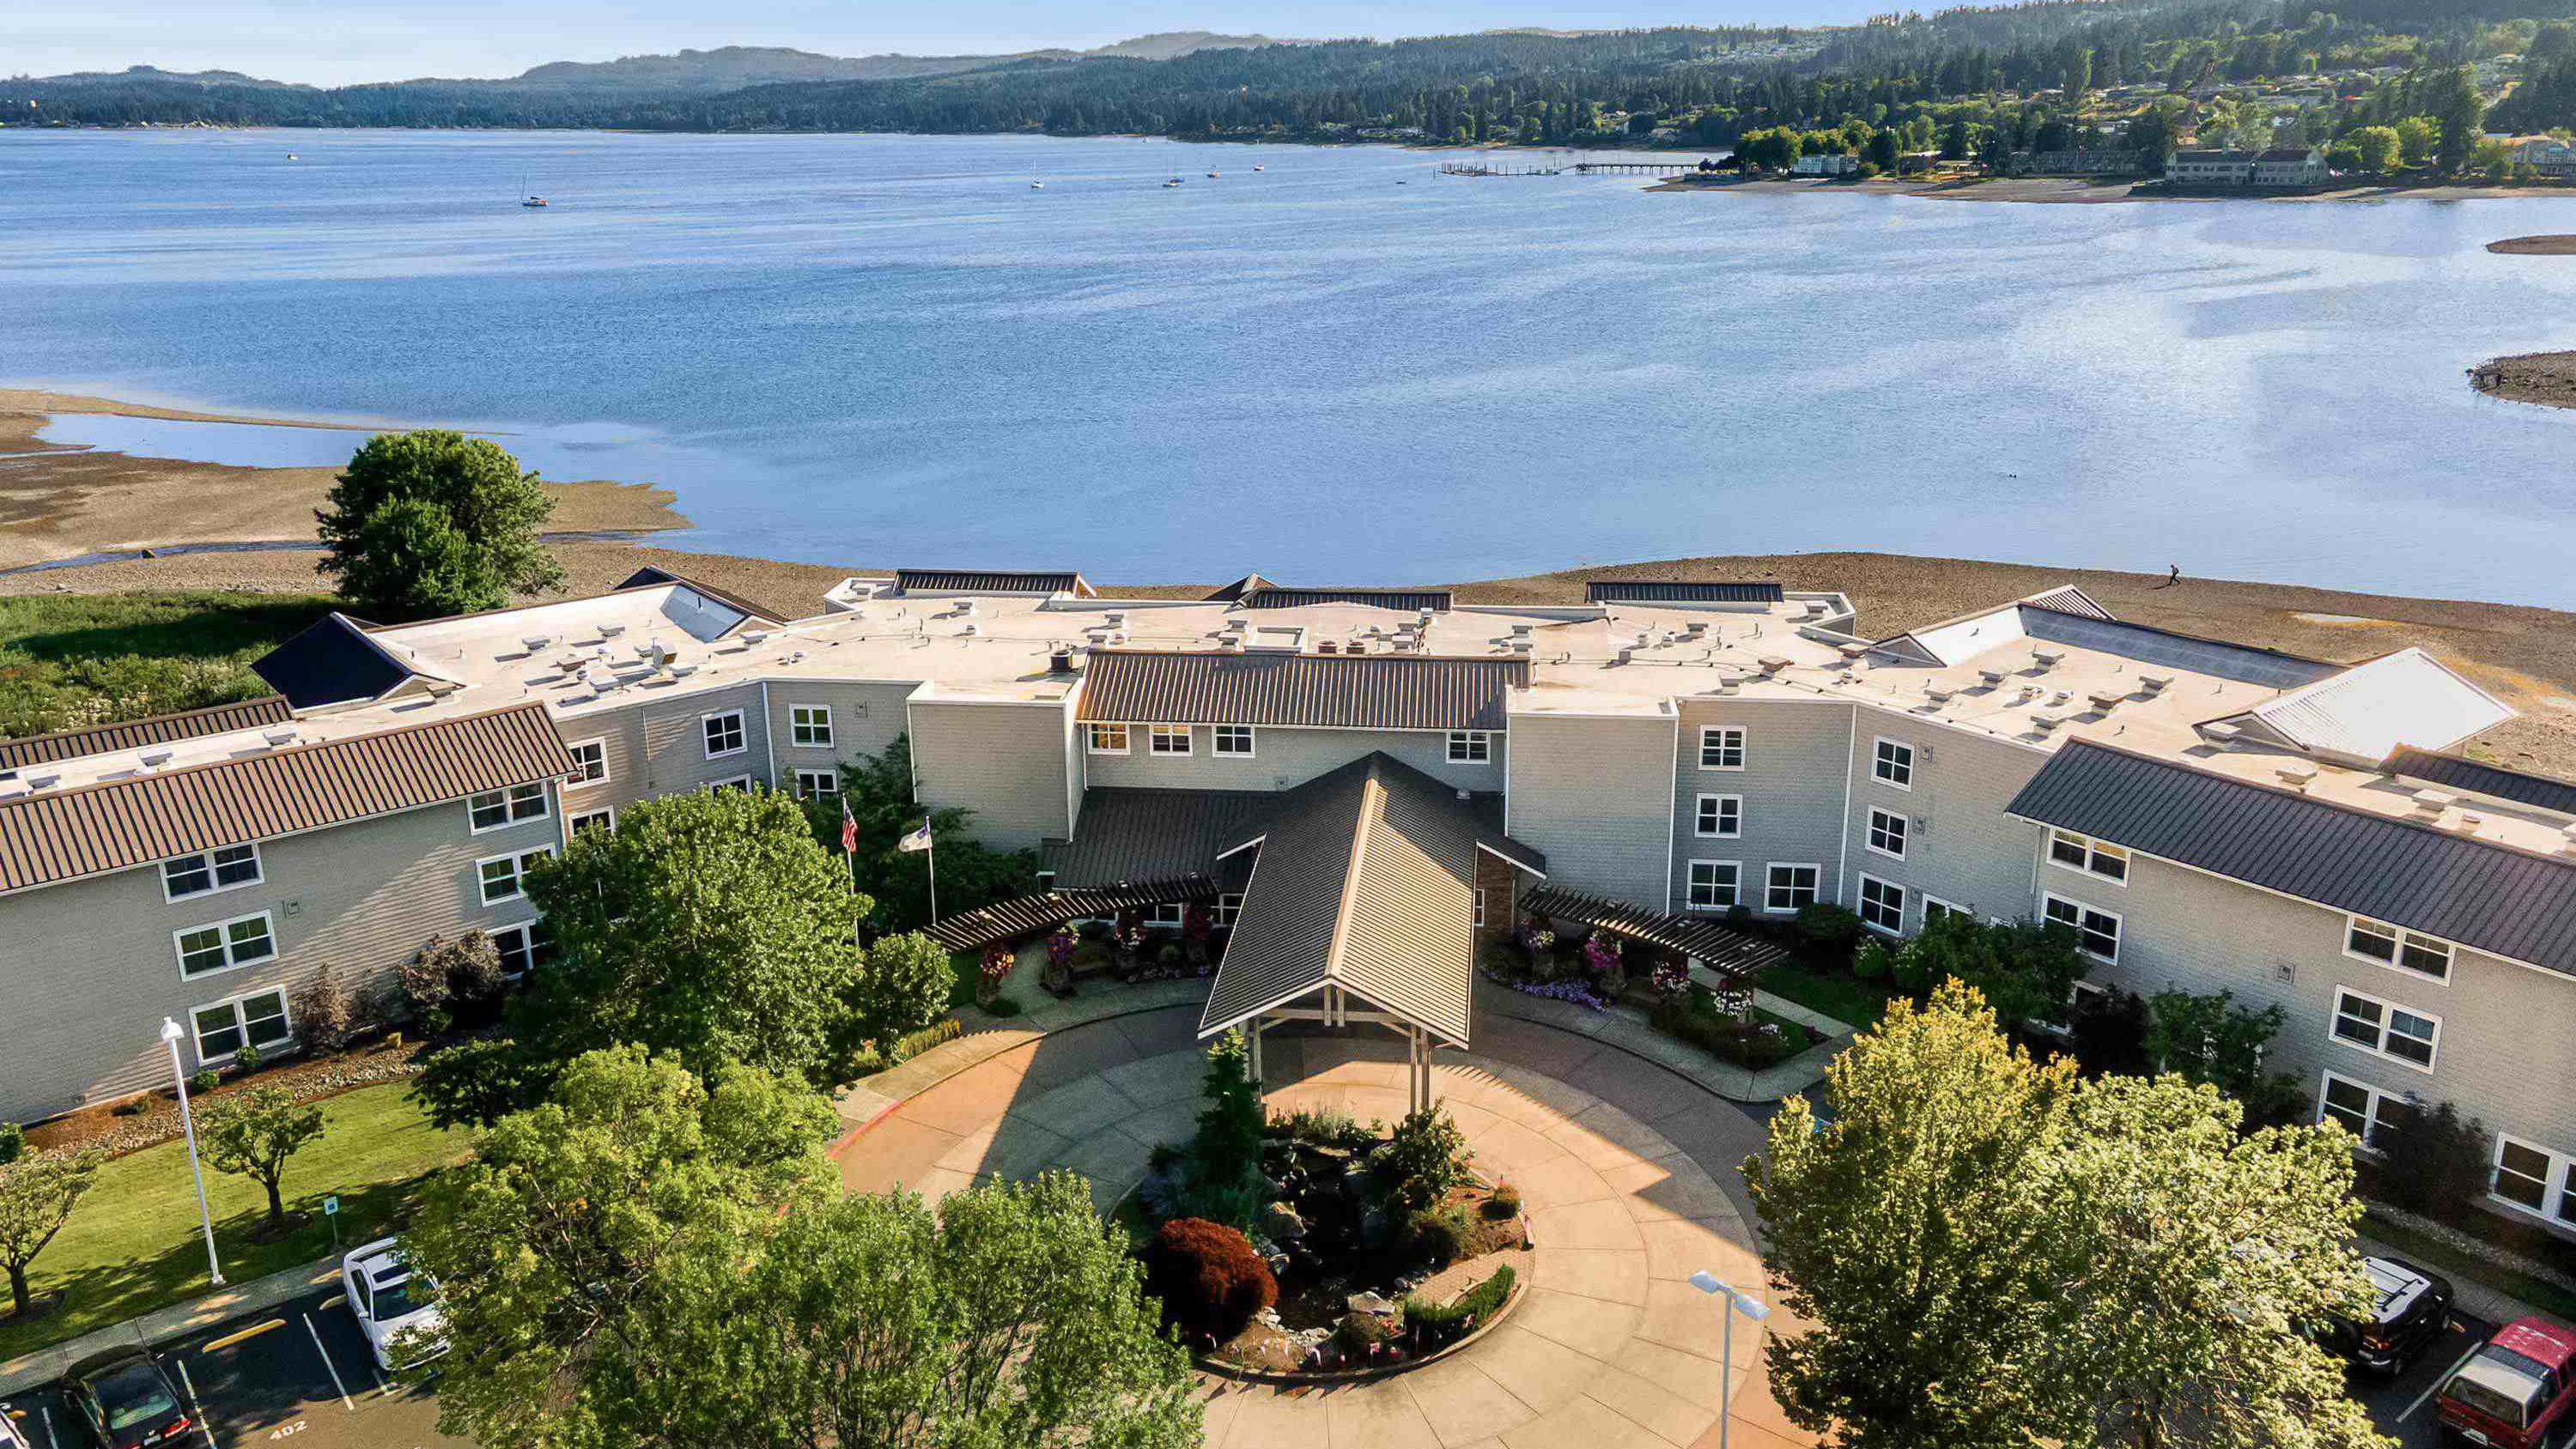 Aerial view of Crista Shores and Dyes Inlet, Silverdale, WA